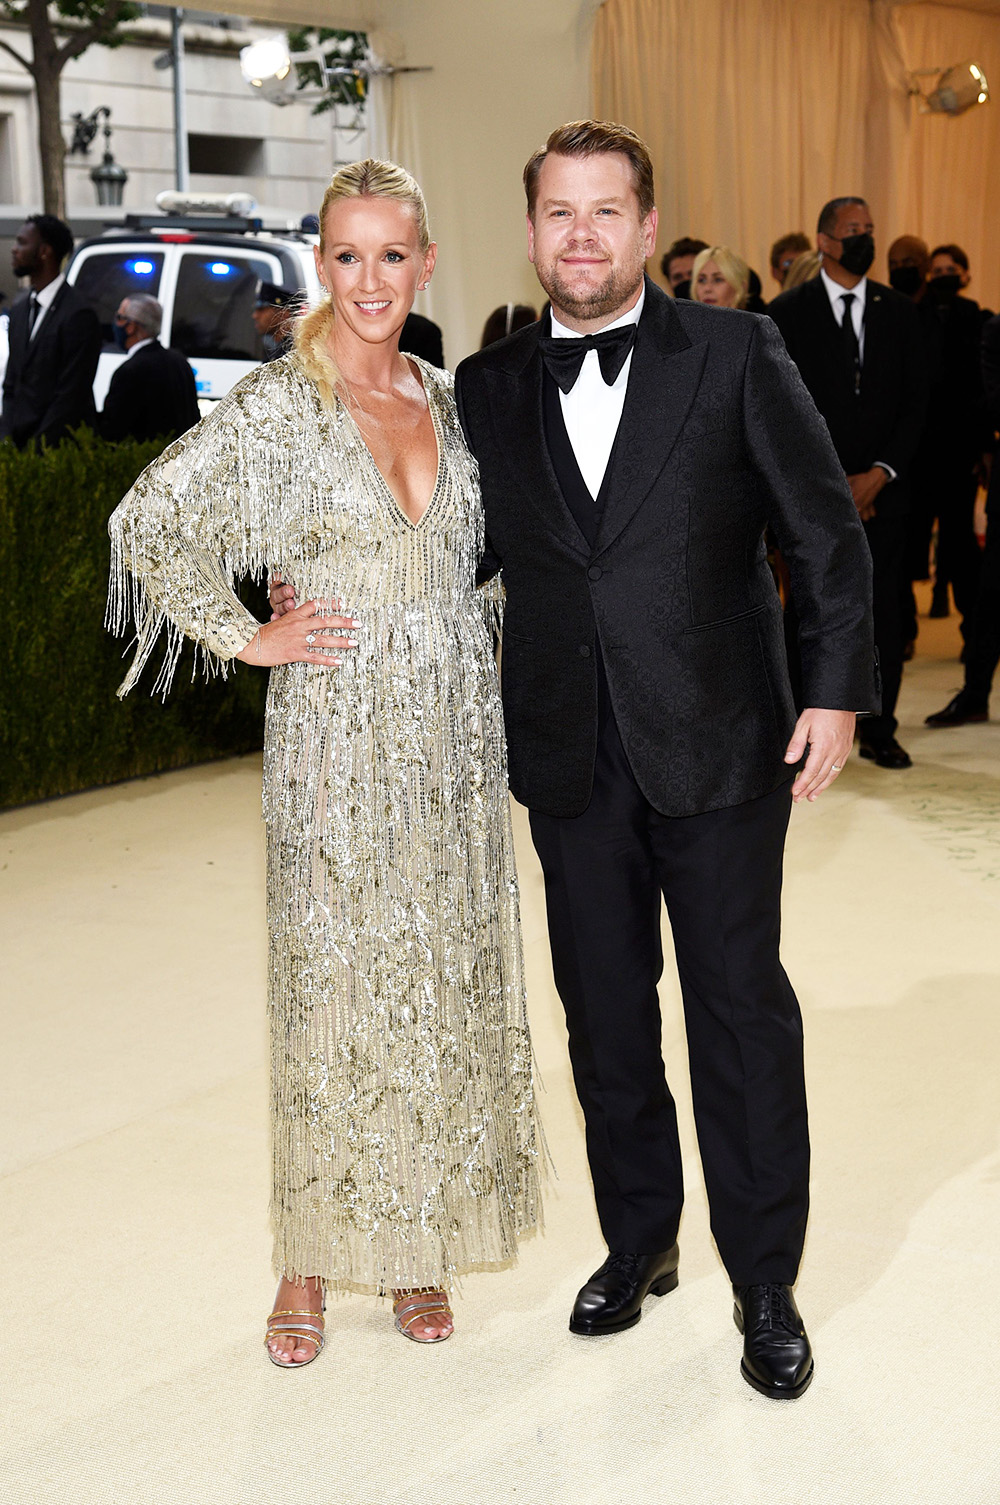 Julia Carey, left, and James Corden attend the Metropolitan Museum of Art's Costume Institute Benefit Gala Celebrating the Opening of 'In America: A Lexicon of Fashion